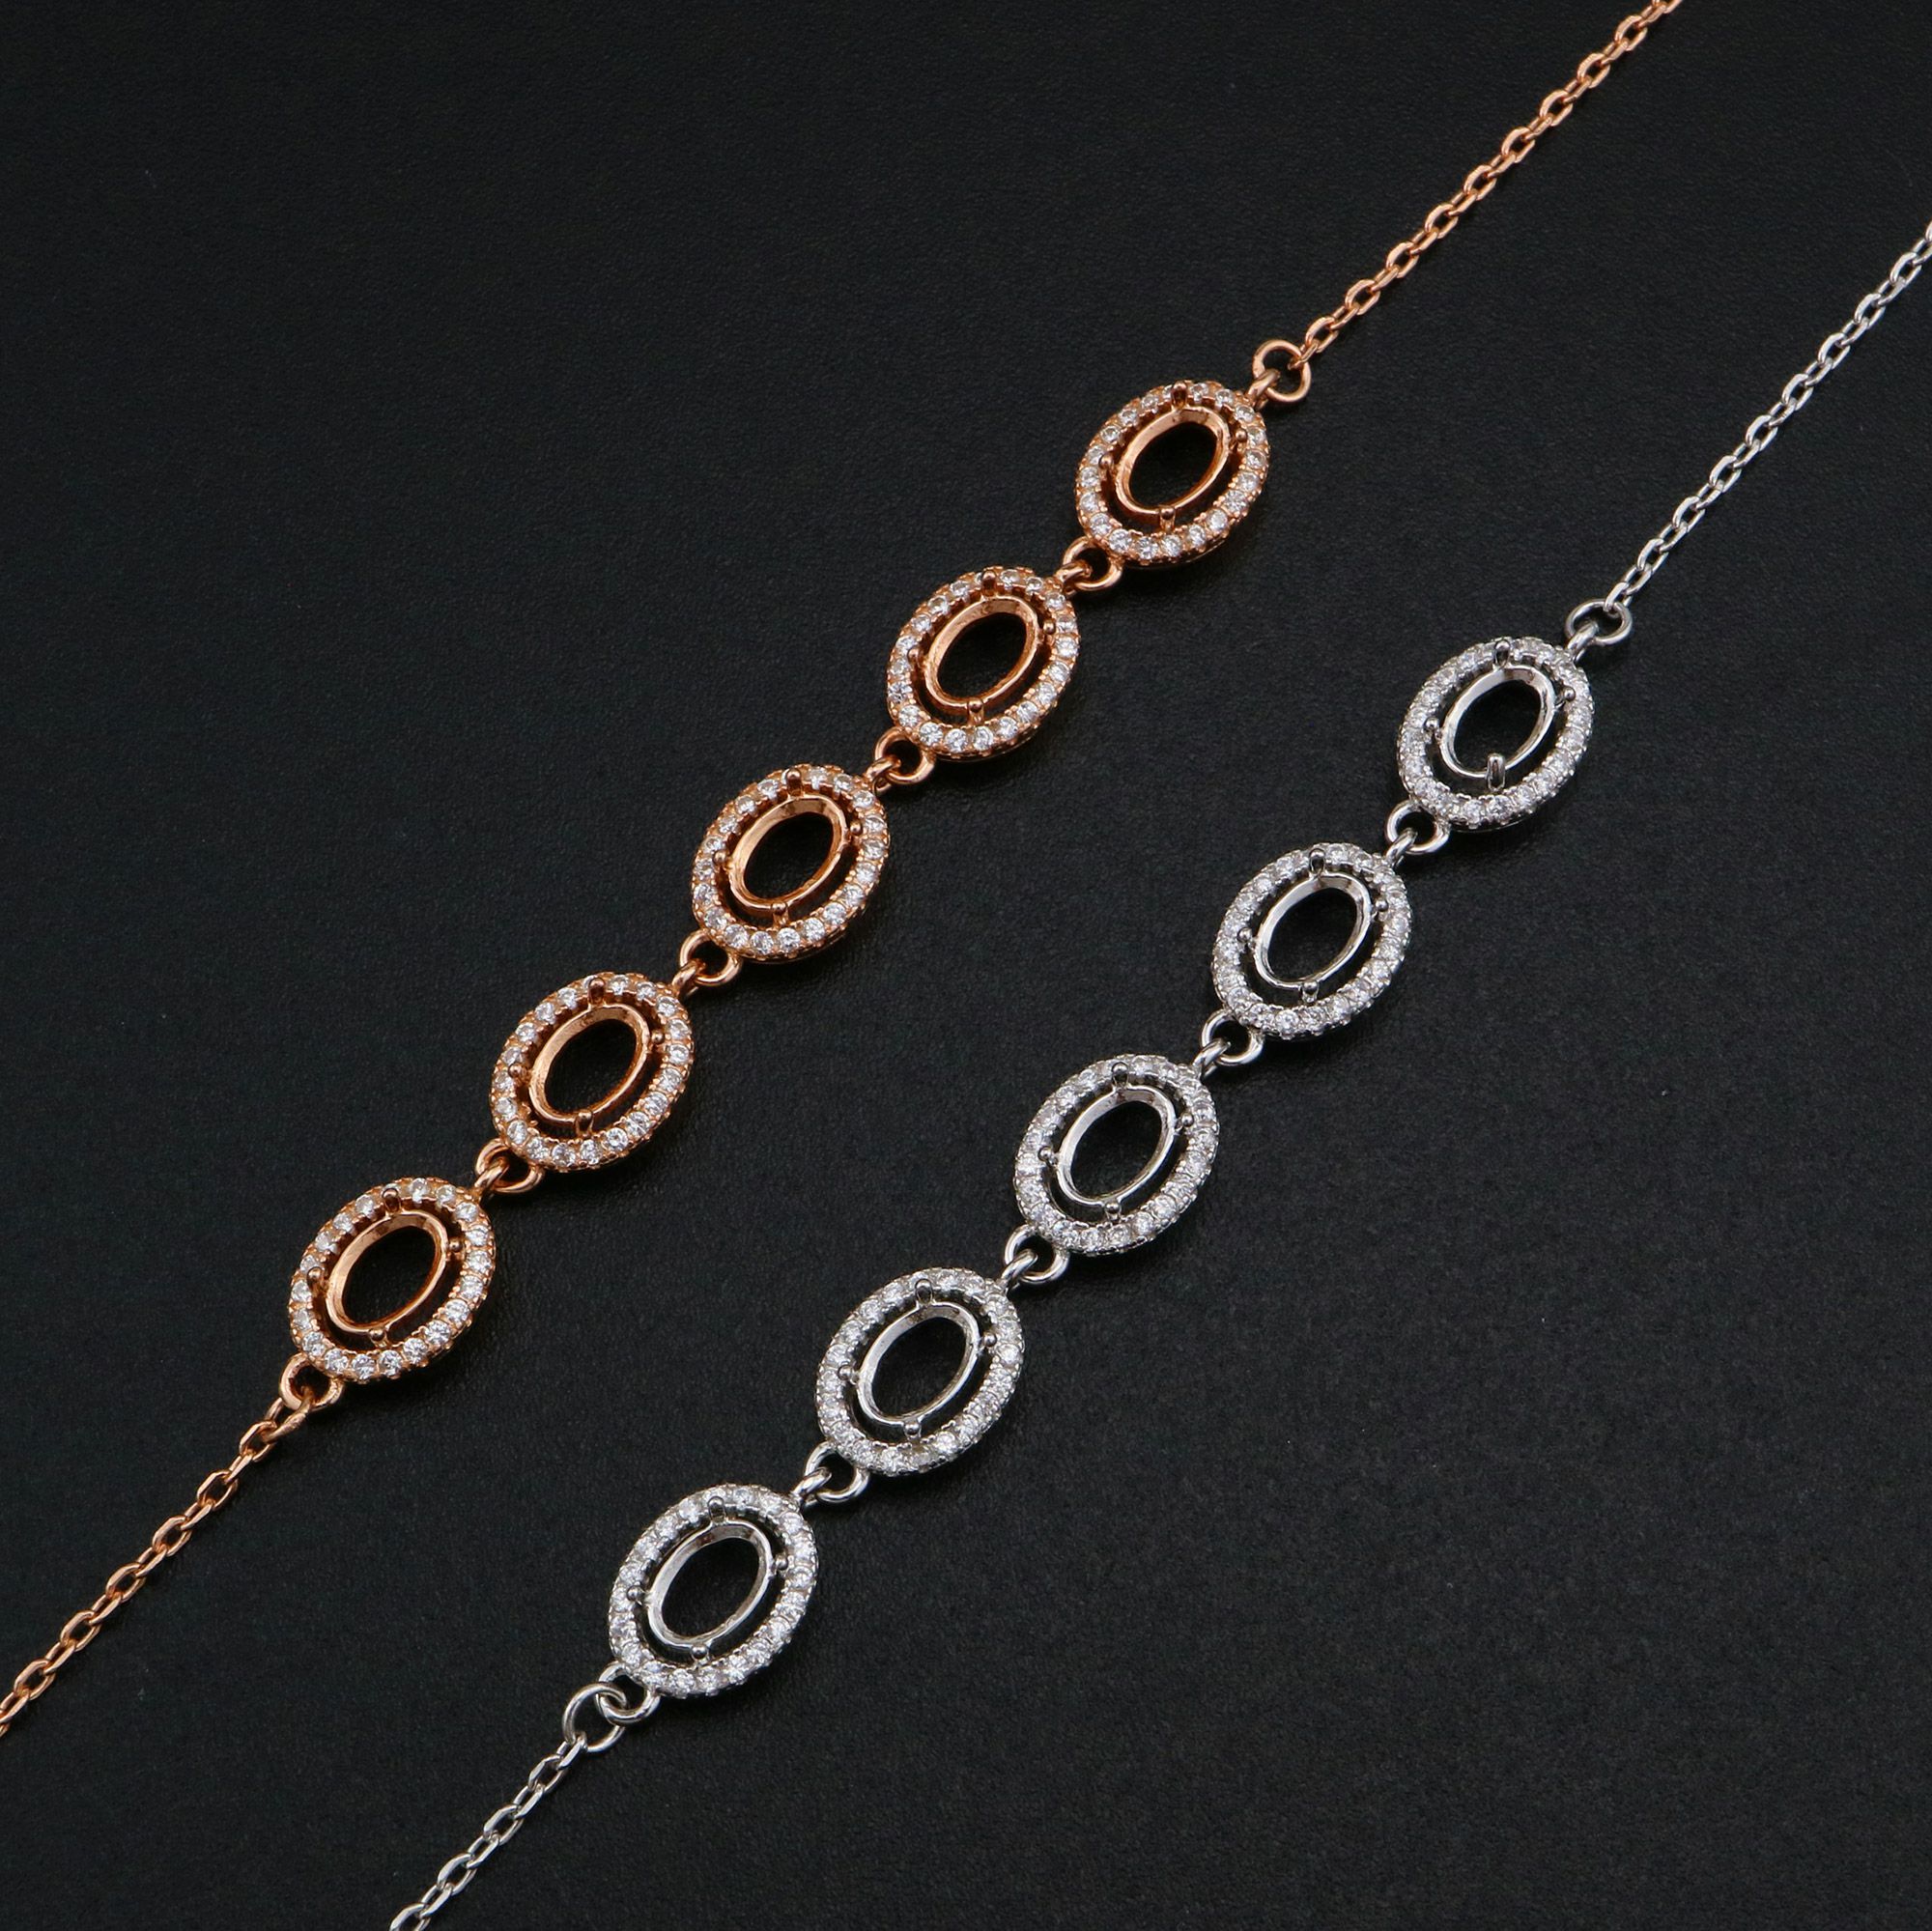 4x6MM Oval Prong Bracelet Settings Halo 5 Stones Rose Gold Plated Solid 925 Sterling Silver Bracelet Bezel with 6''+1.6'' Chain 1900265 - Click Image to Close